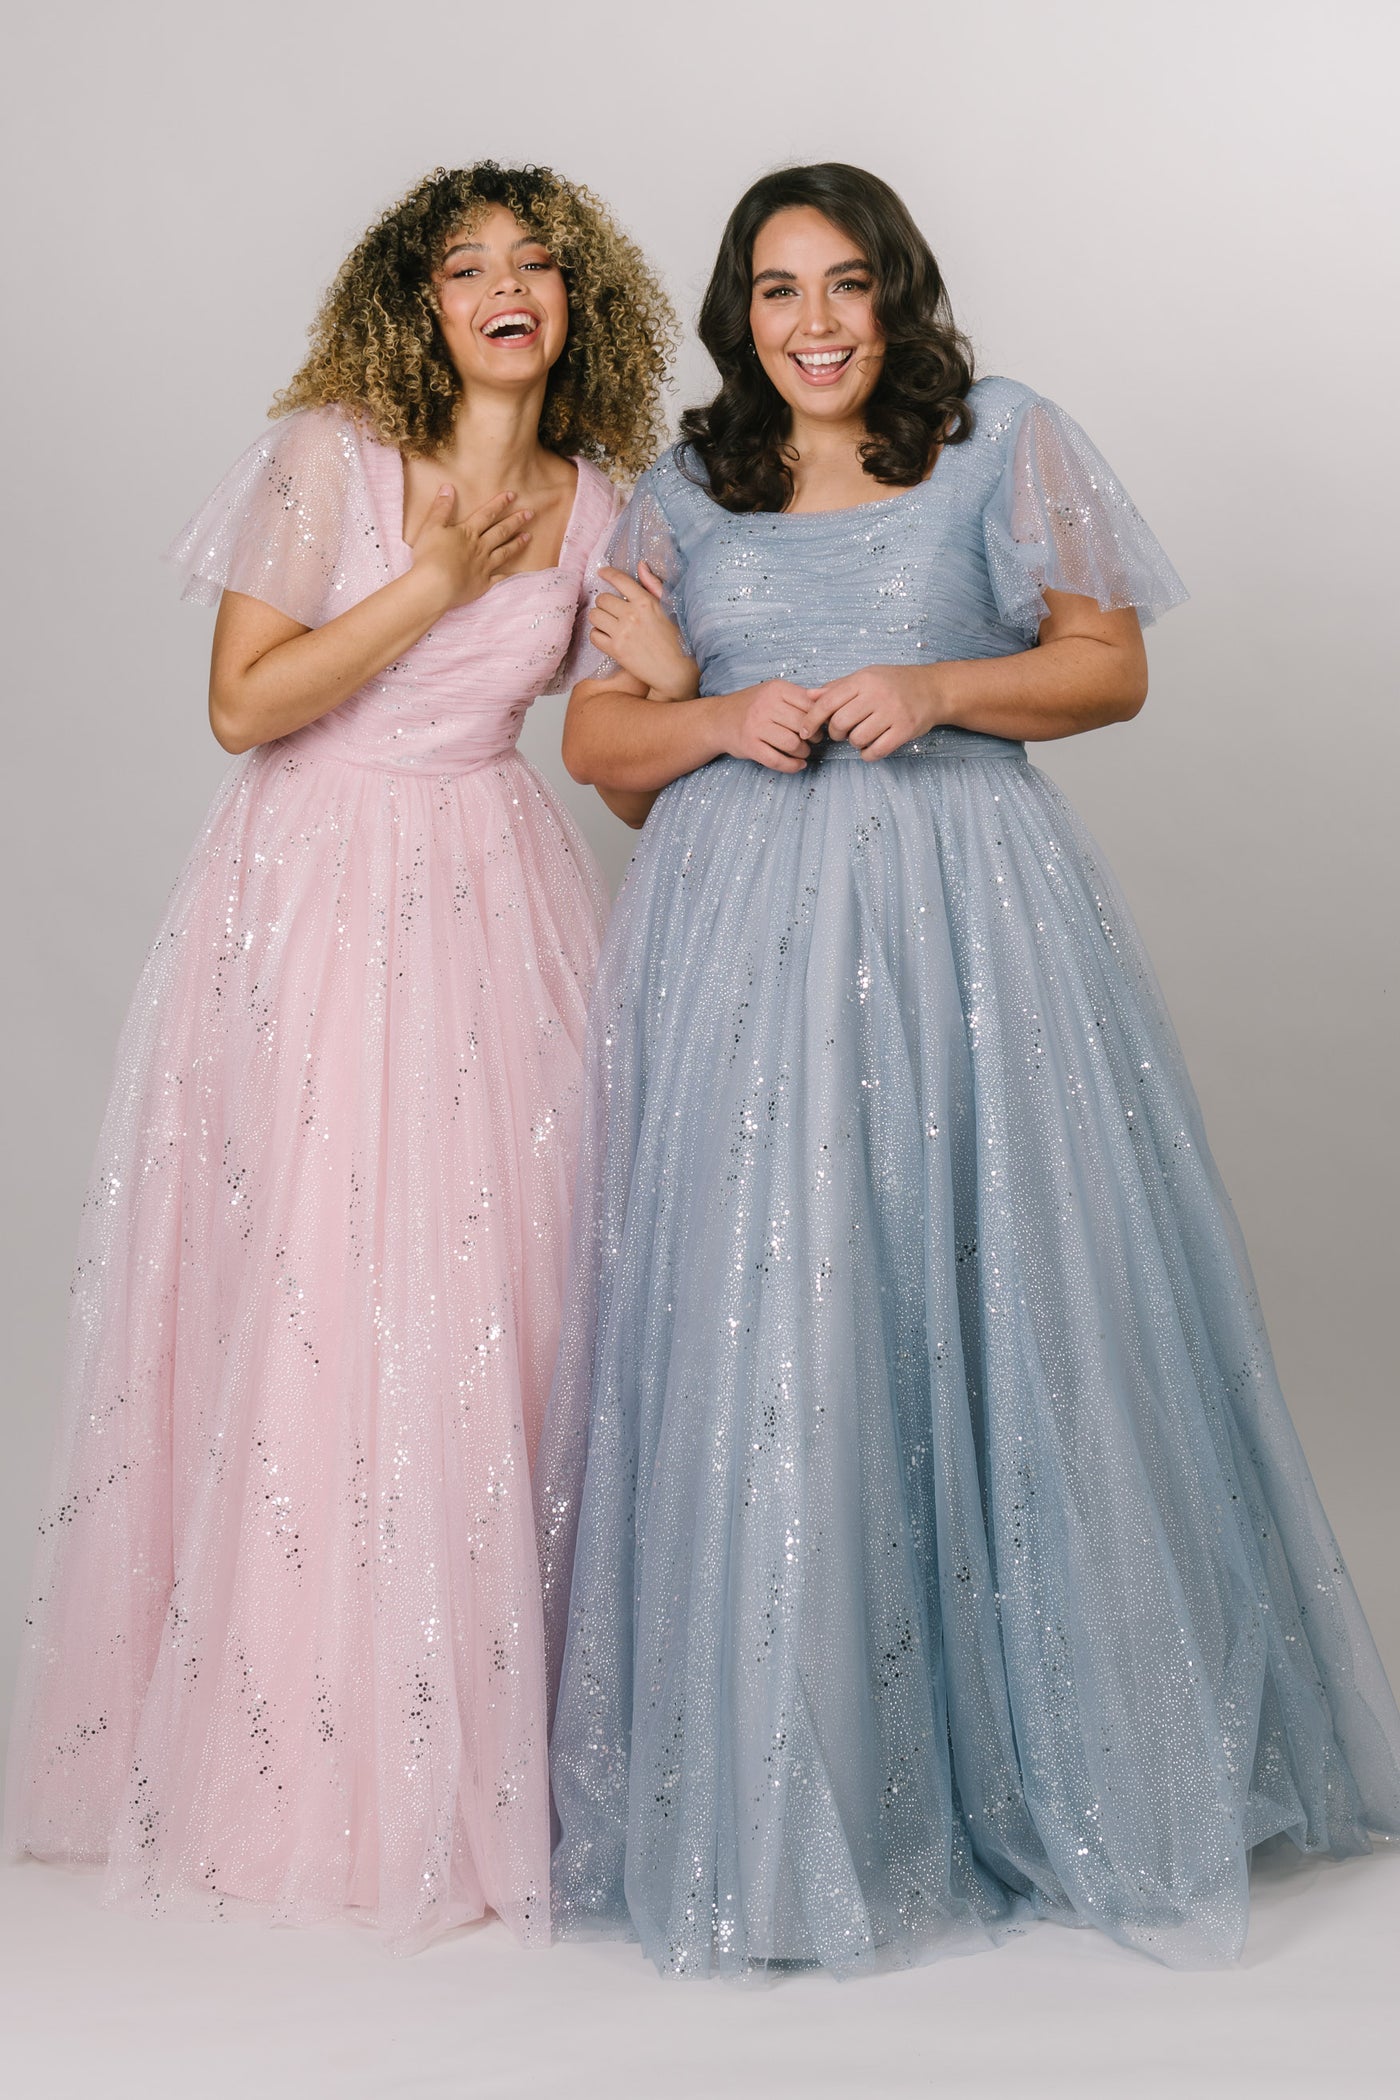 Modest Dresses - Modest Prom Dress - Formalwear Modest Dresses - Bridesmaid Modest Dresses Model showing ballgown in Pink and Blue side by side.